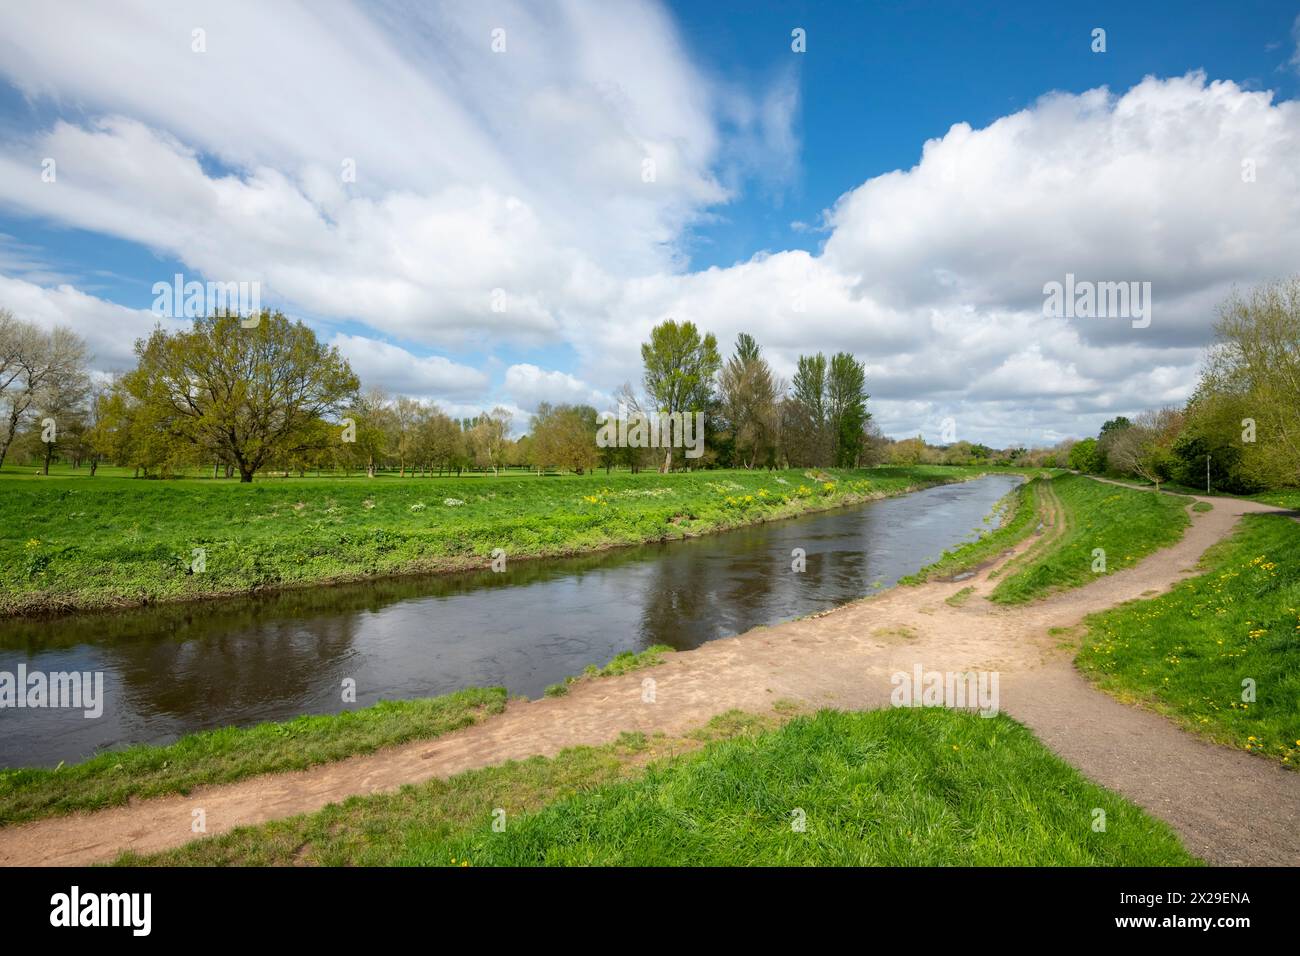 The river Mersey near Northenden in Greater Manchester, England. Popular place for locals to walk along the river bank. Stock Photo